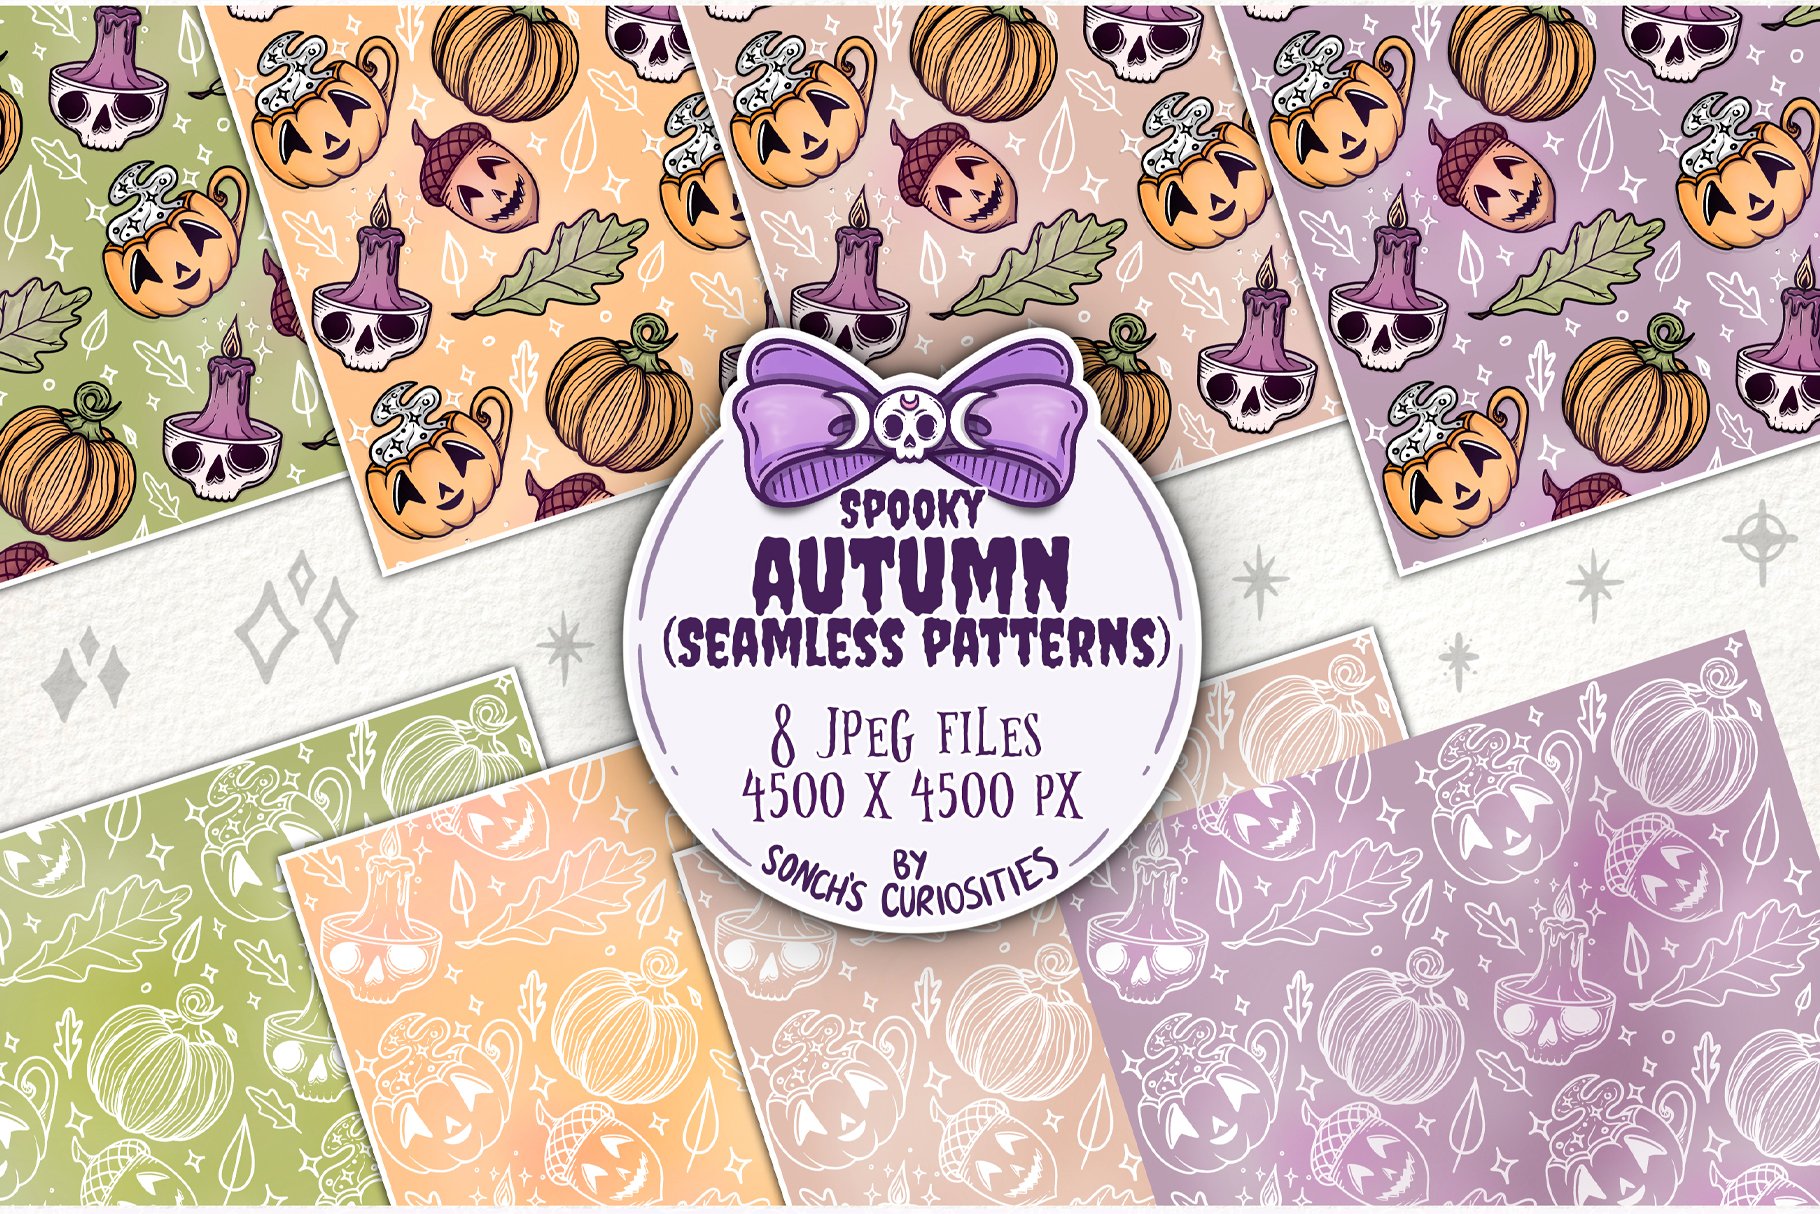 Spooky Autumn seamless pattern pack cover image.